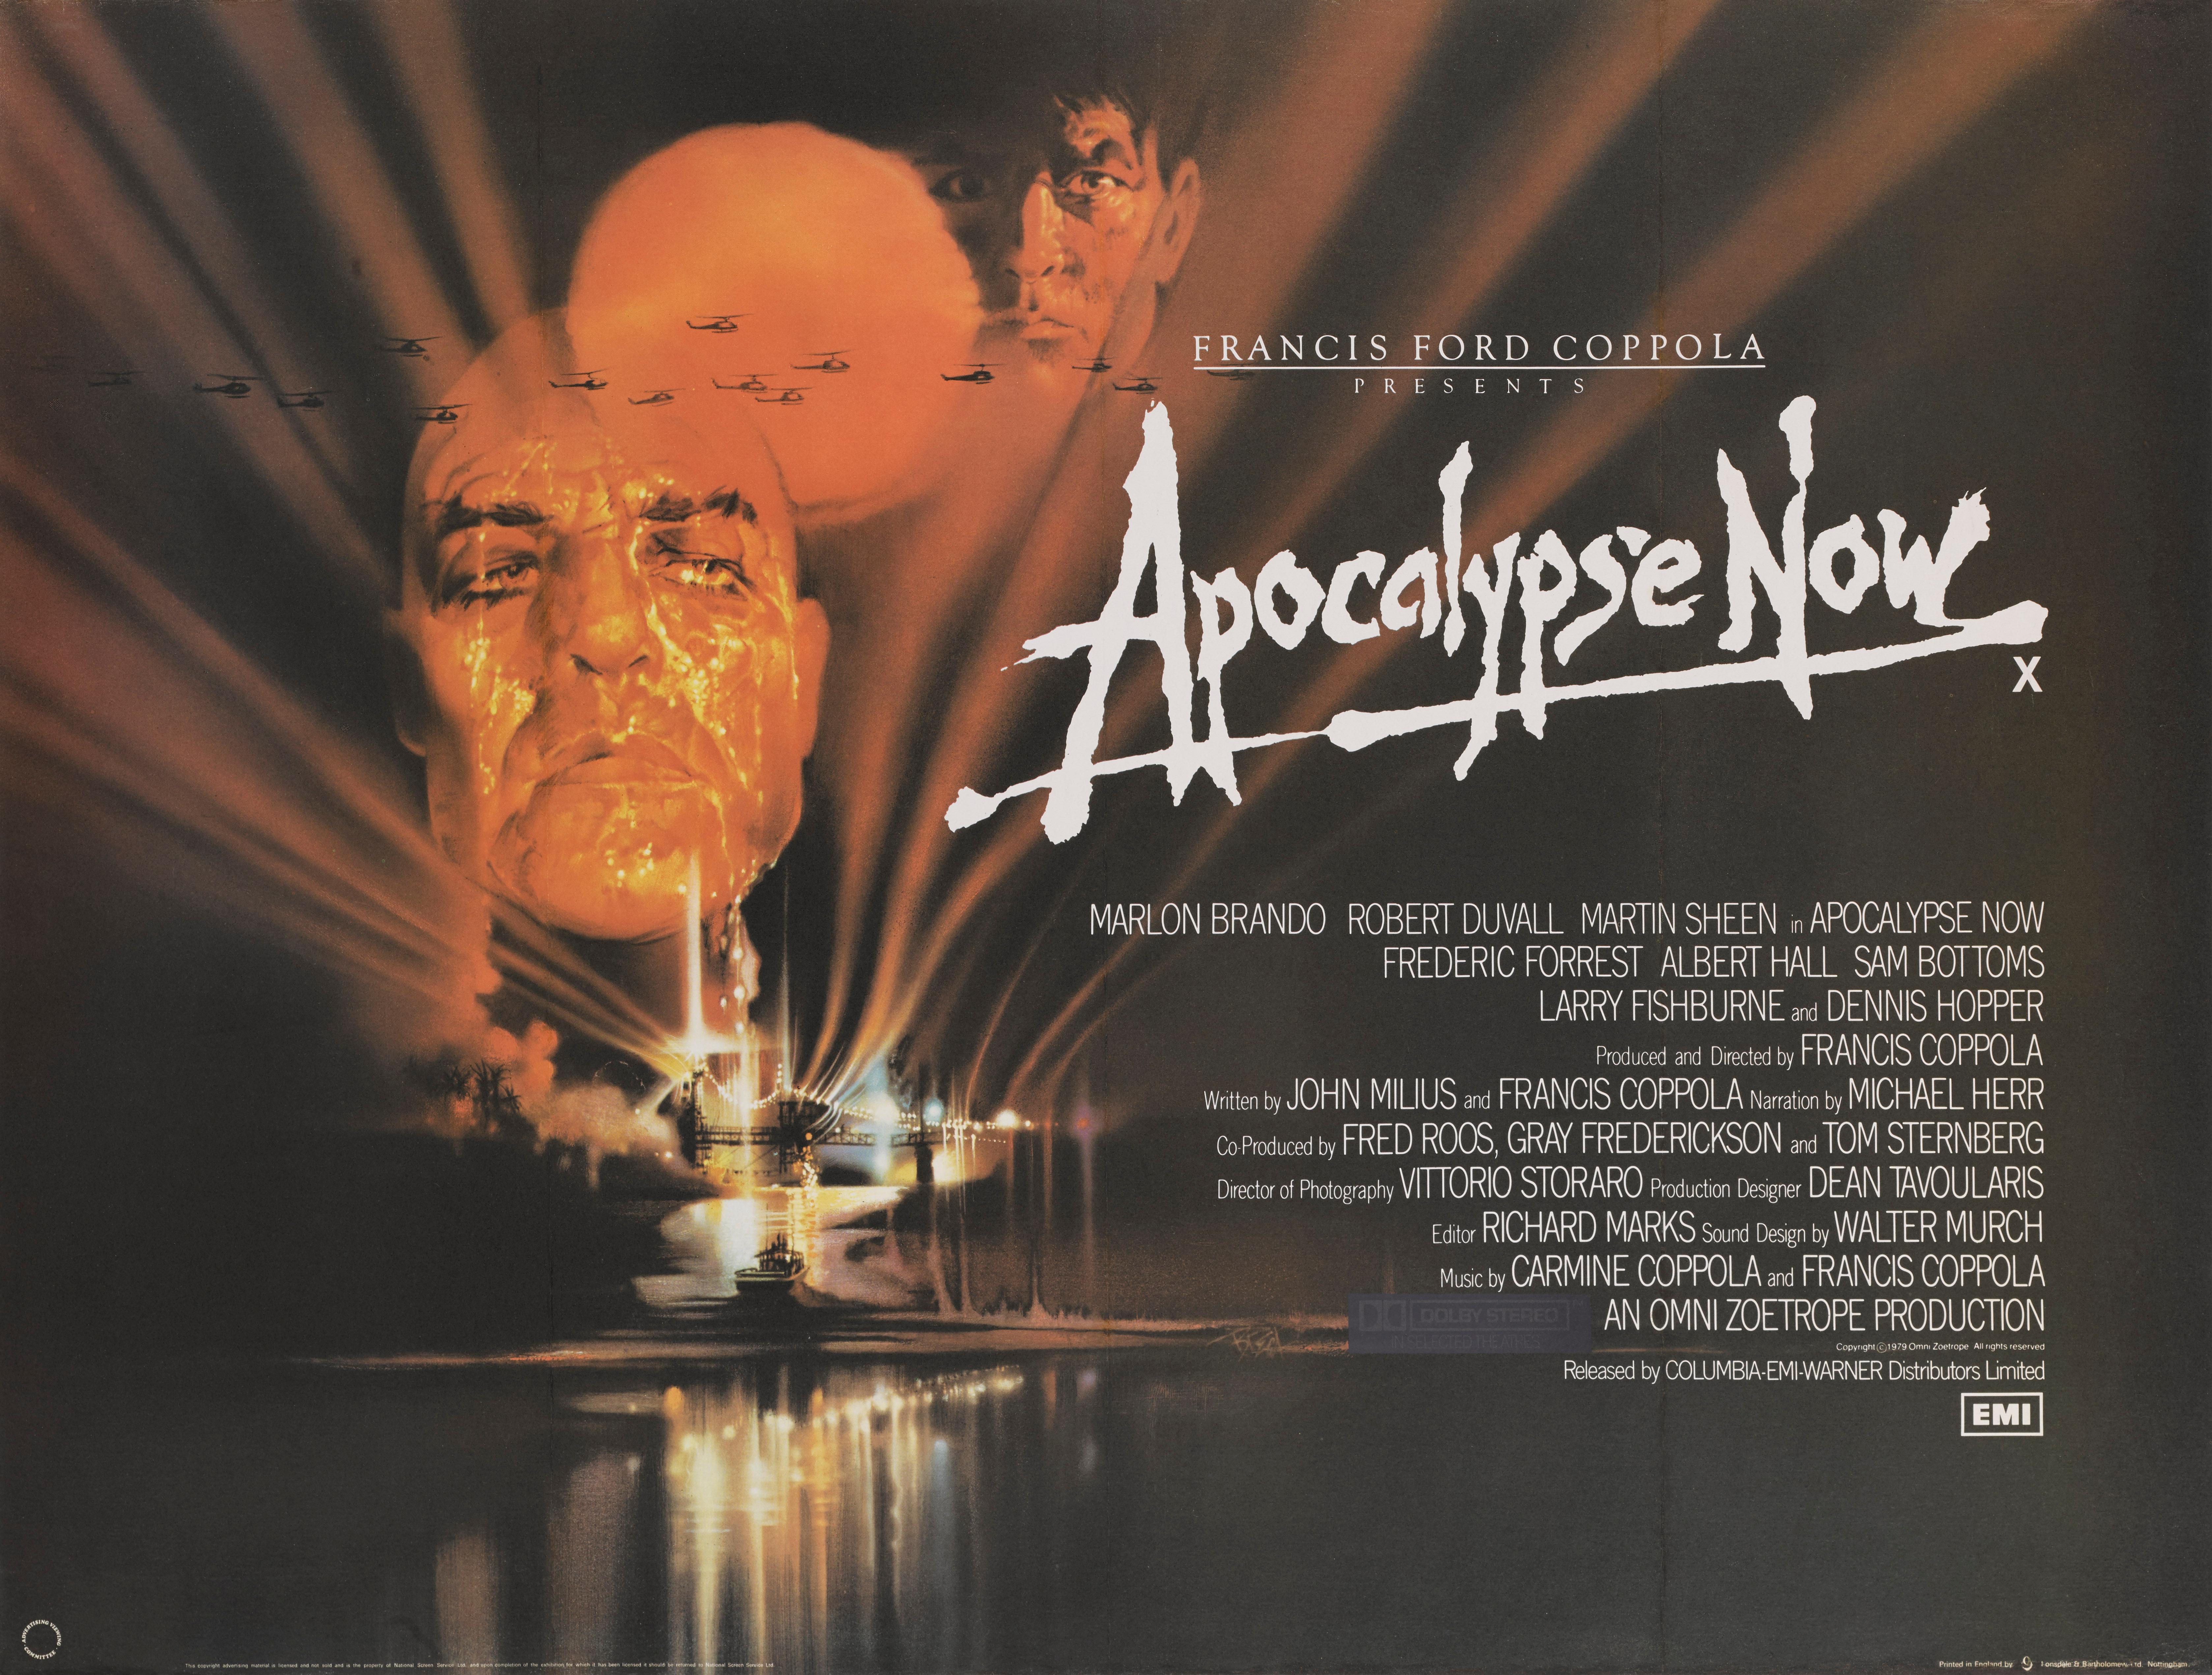 Apocalypse Now original British film poster for Marlon Brando, Martin Sheen and Robert Duvall's Classic 1979 Vietnam film directed by Francis Ford Coppola.
The poster artwork is by the famous American illustrator Bob Peak (1927-1992). This poster is